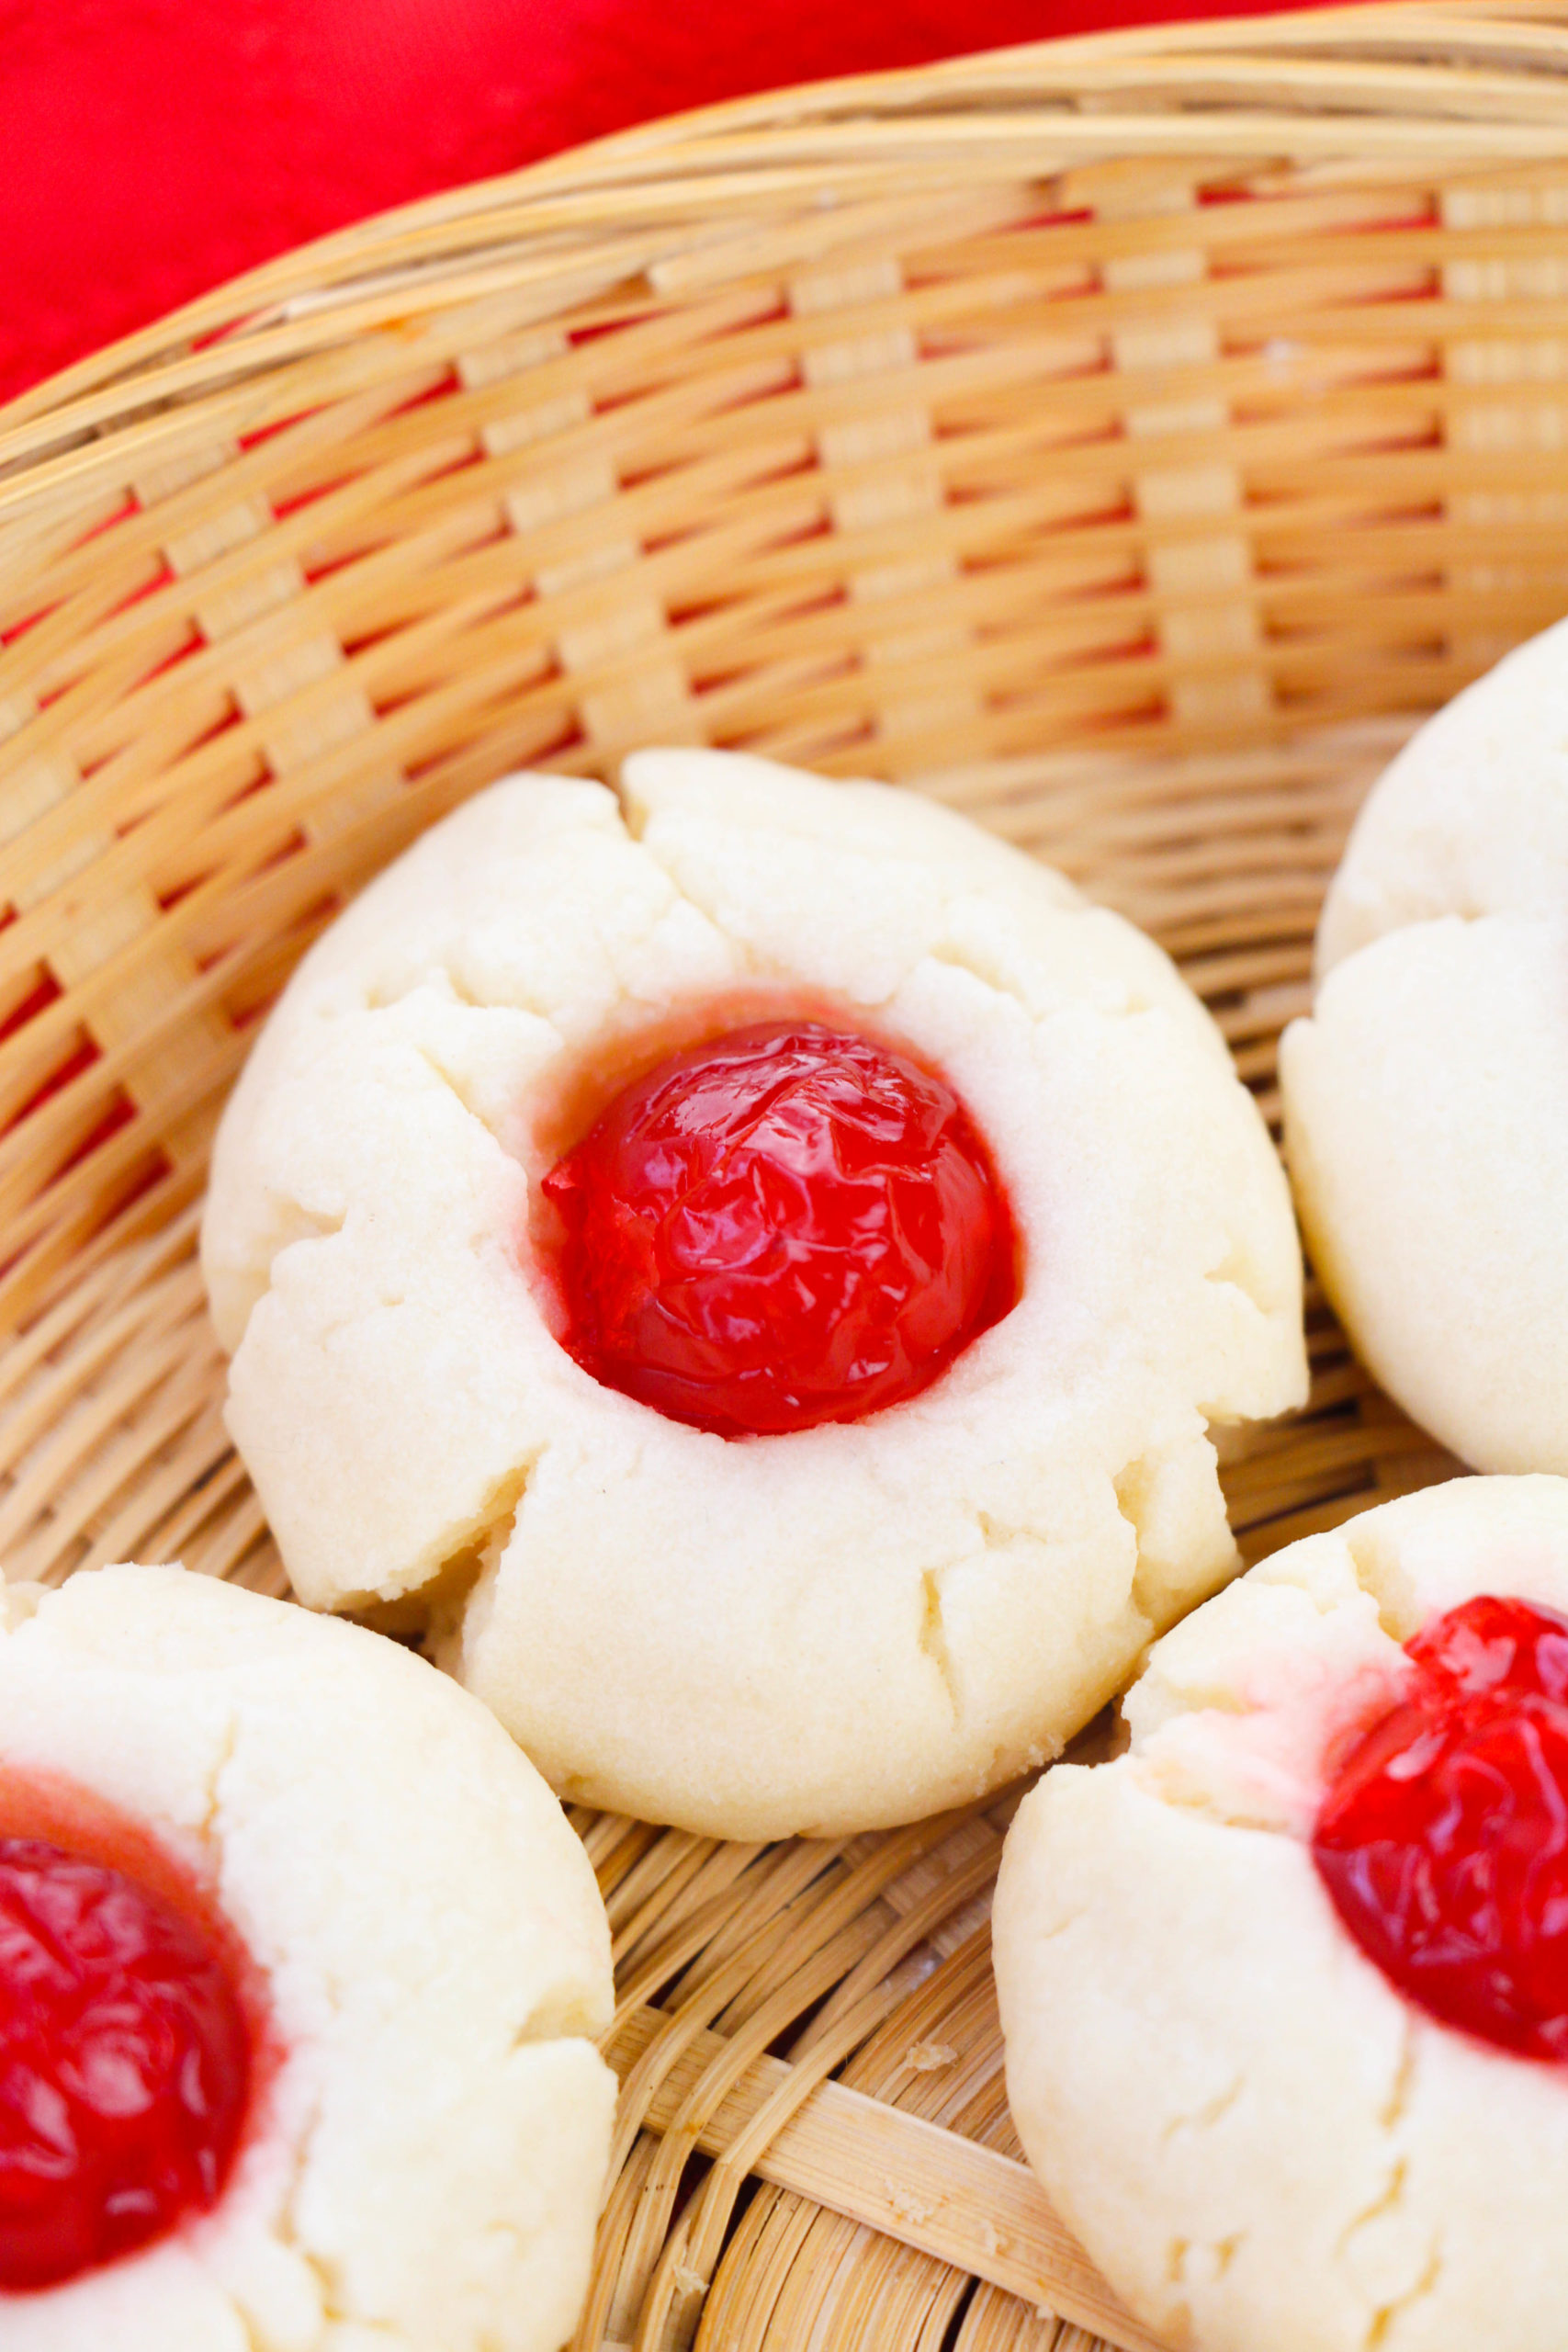 Cherry Shortbread Cookies on a round wicker dish.